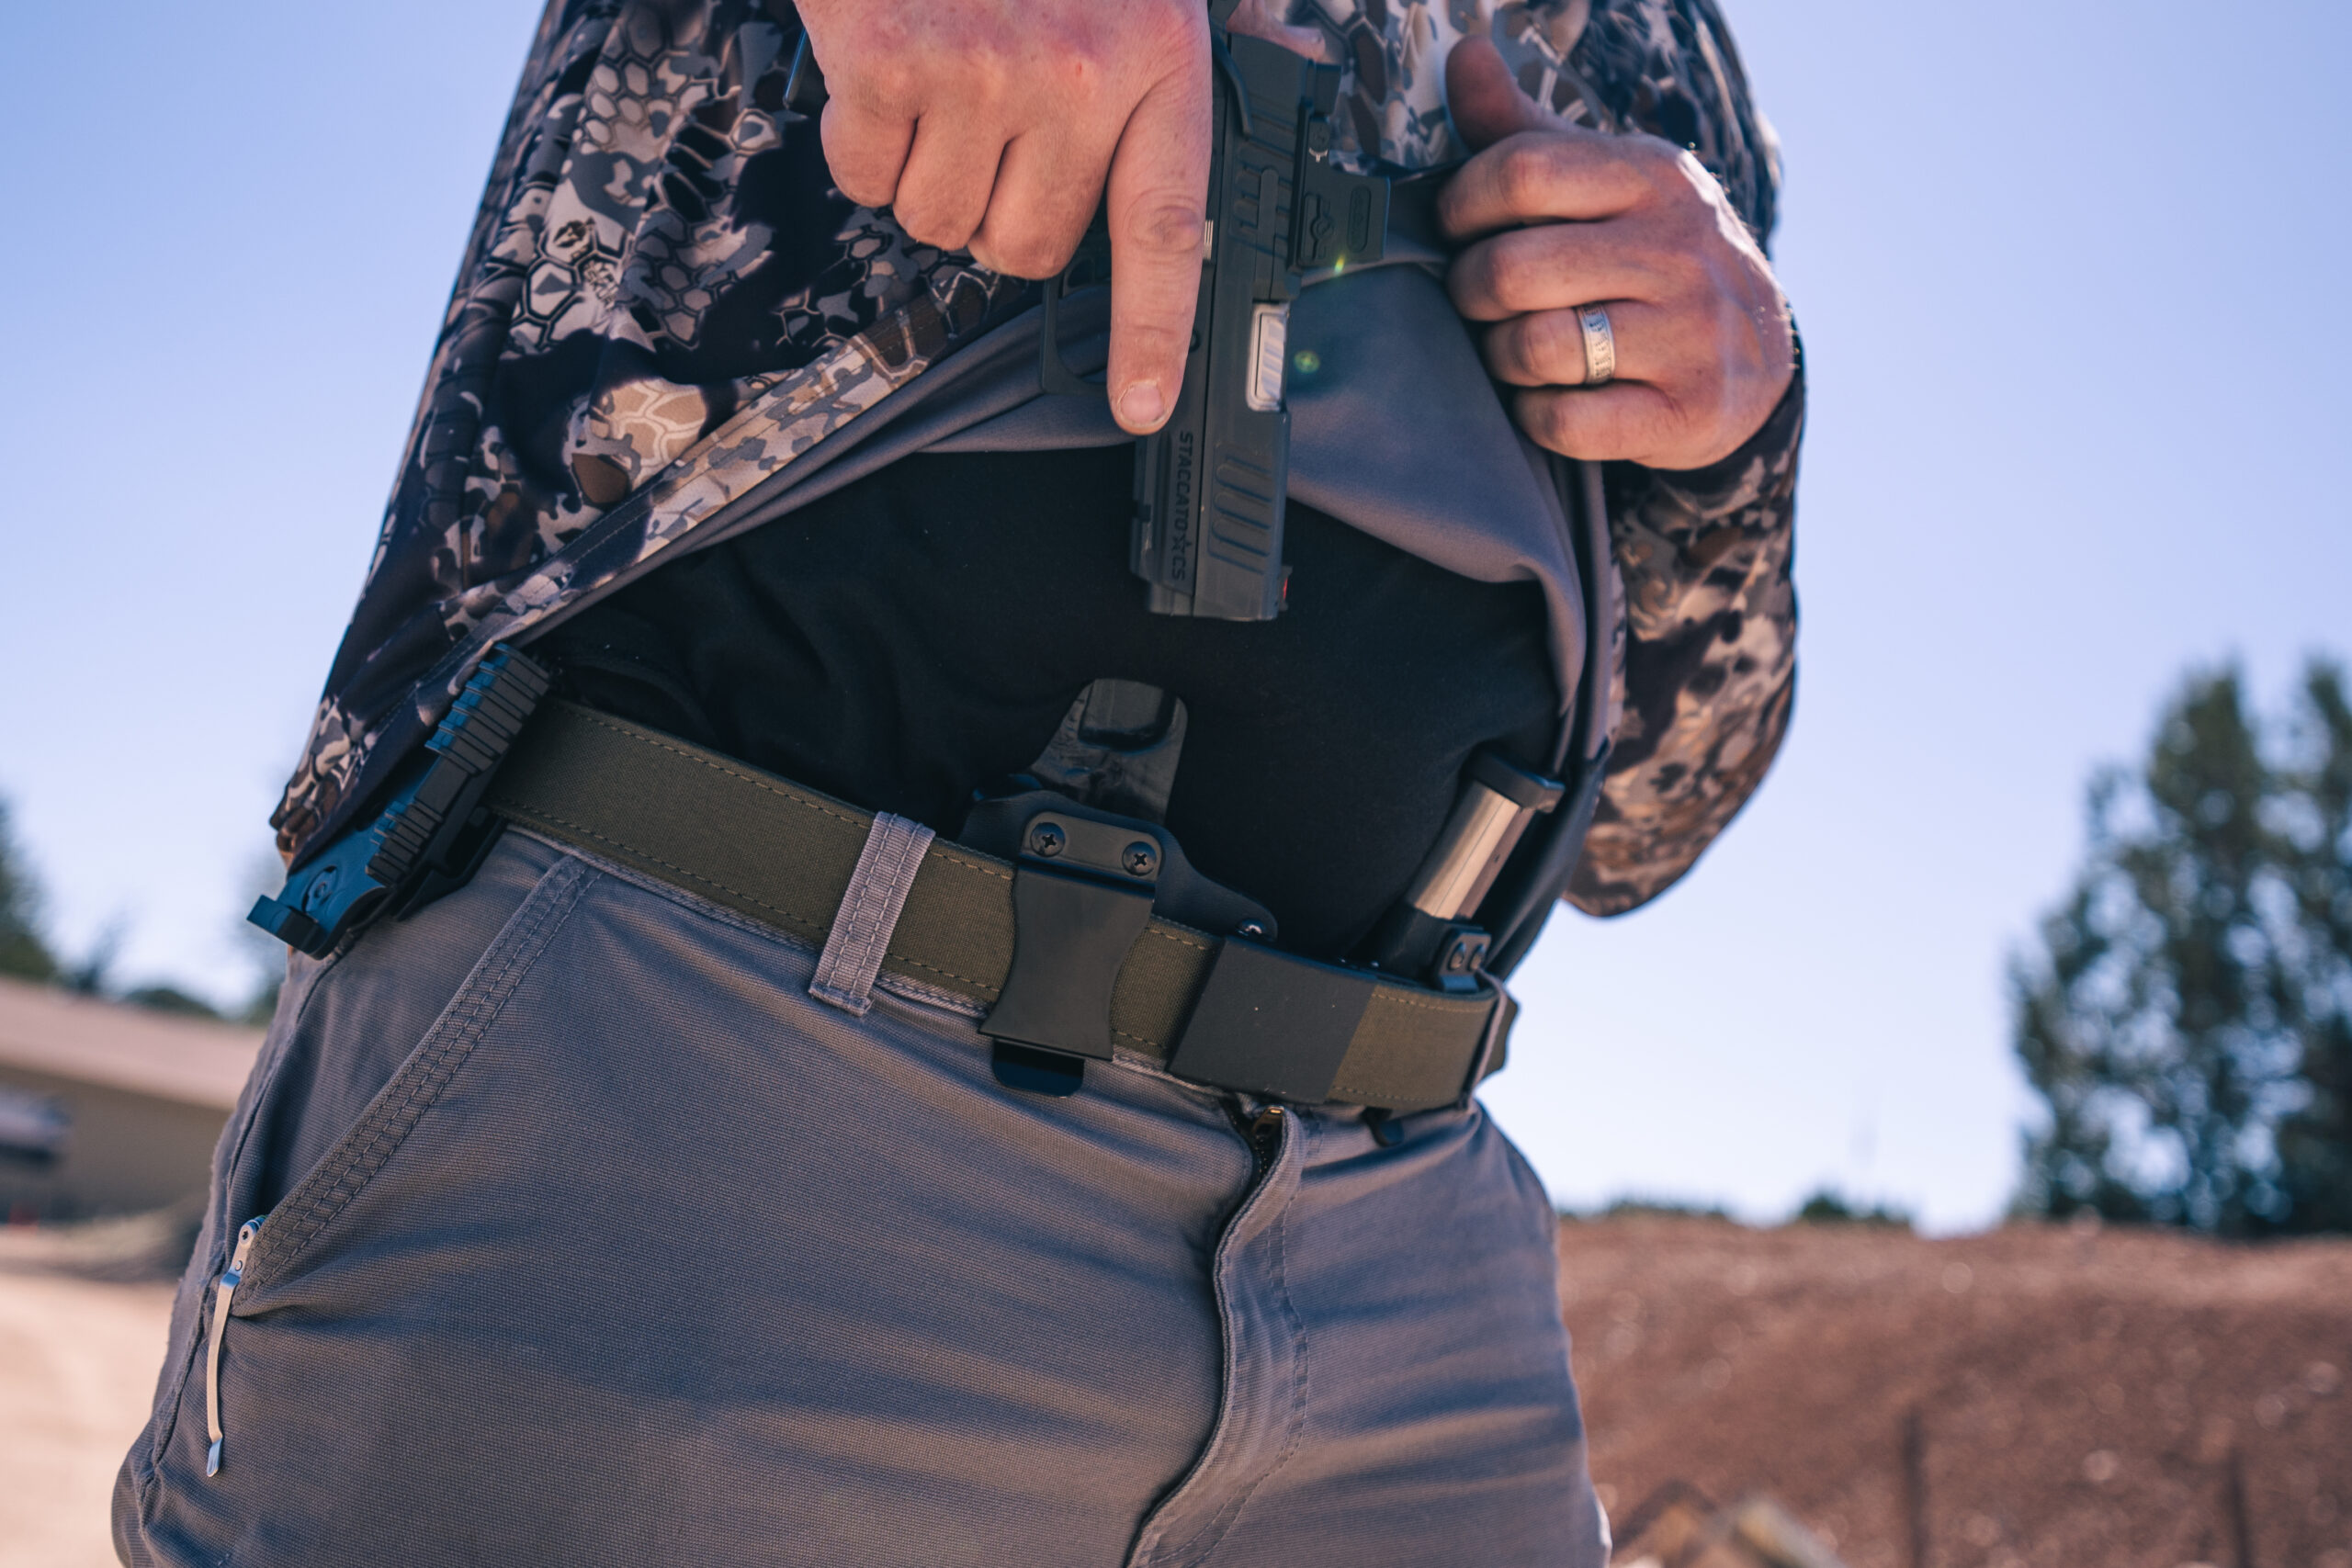 We The People Holsters - Our holster claw is now available! Over 2